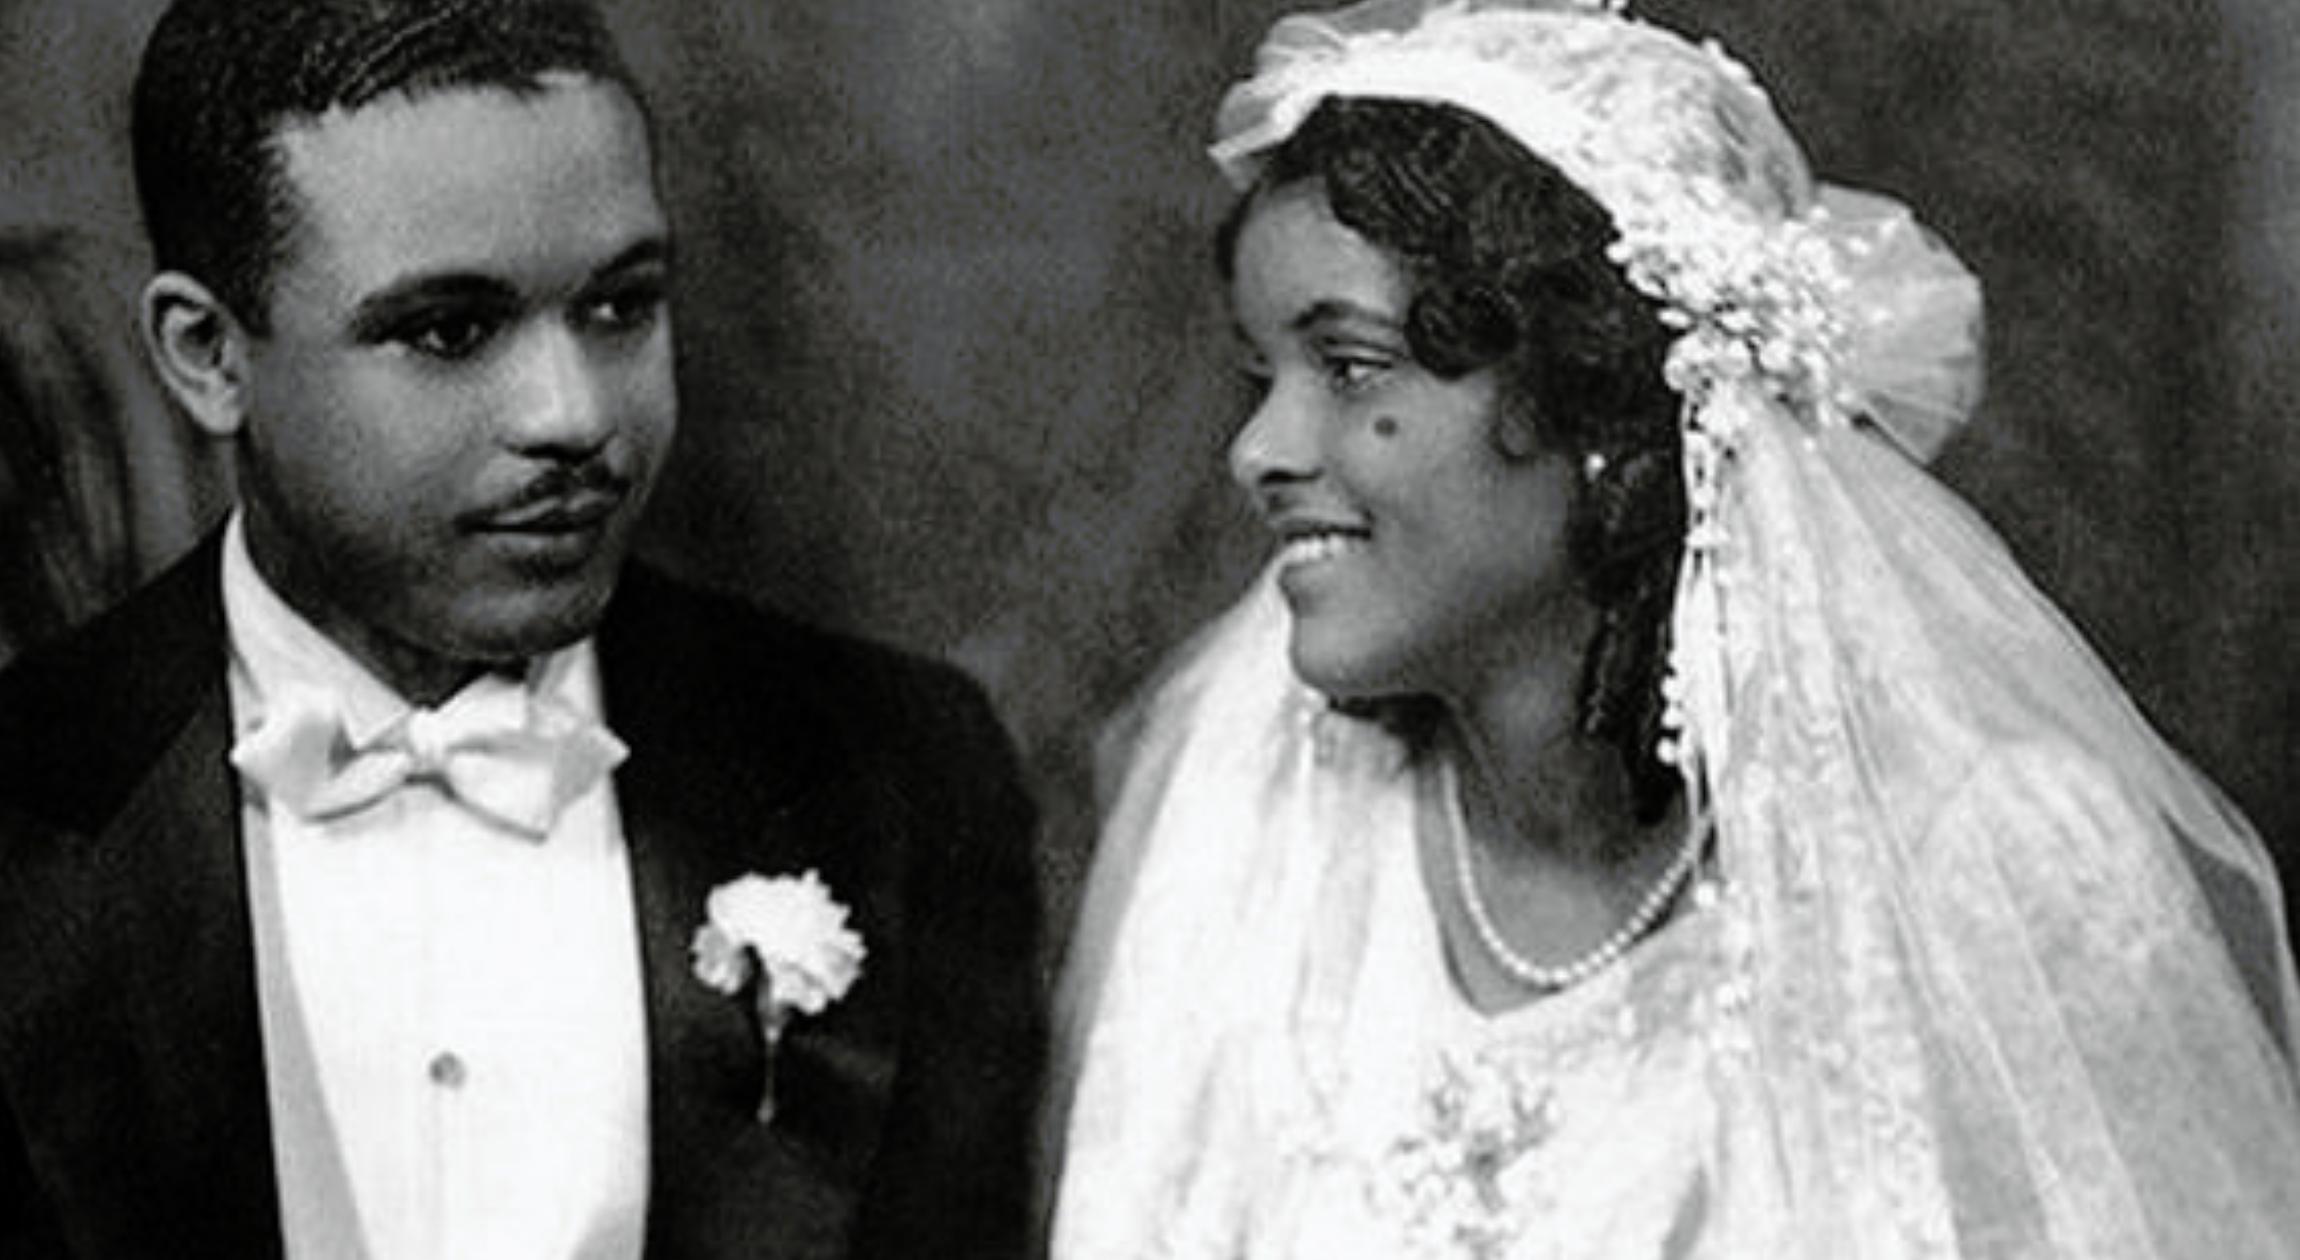 A black and white photo of a Black man in a tuxedo and a Black woman in a white dress and a veil